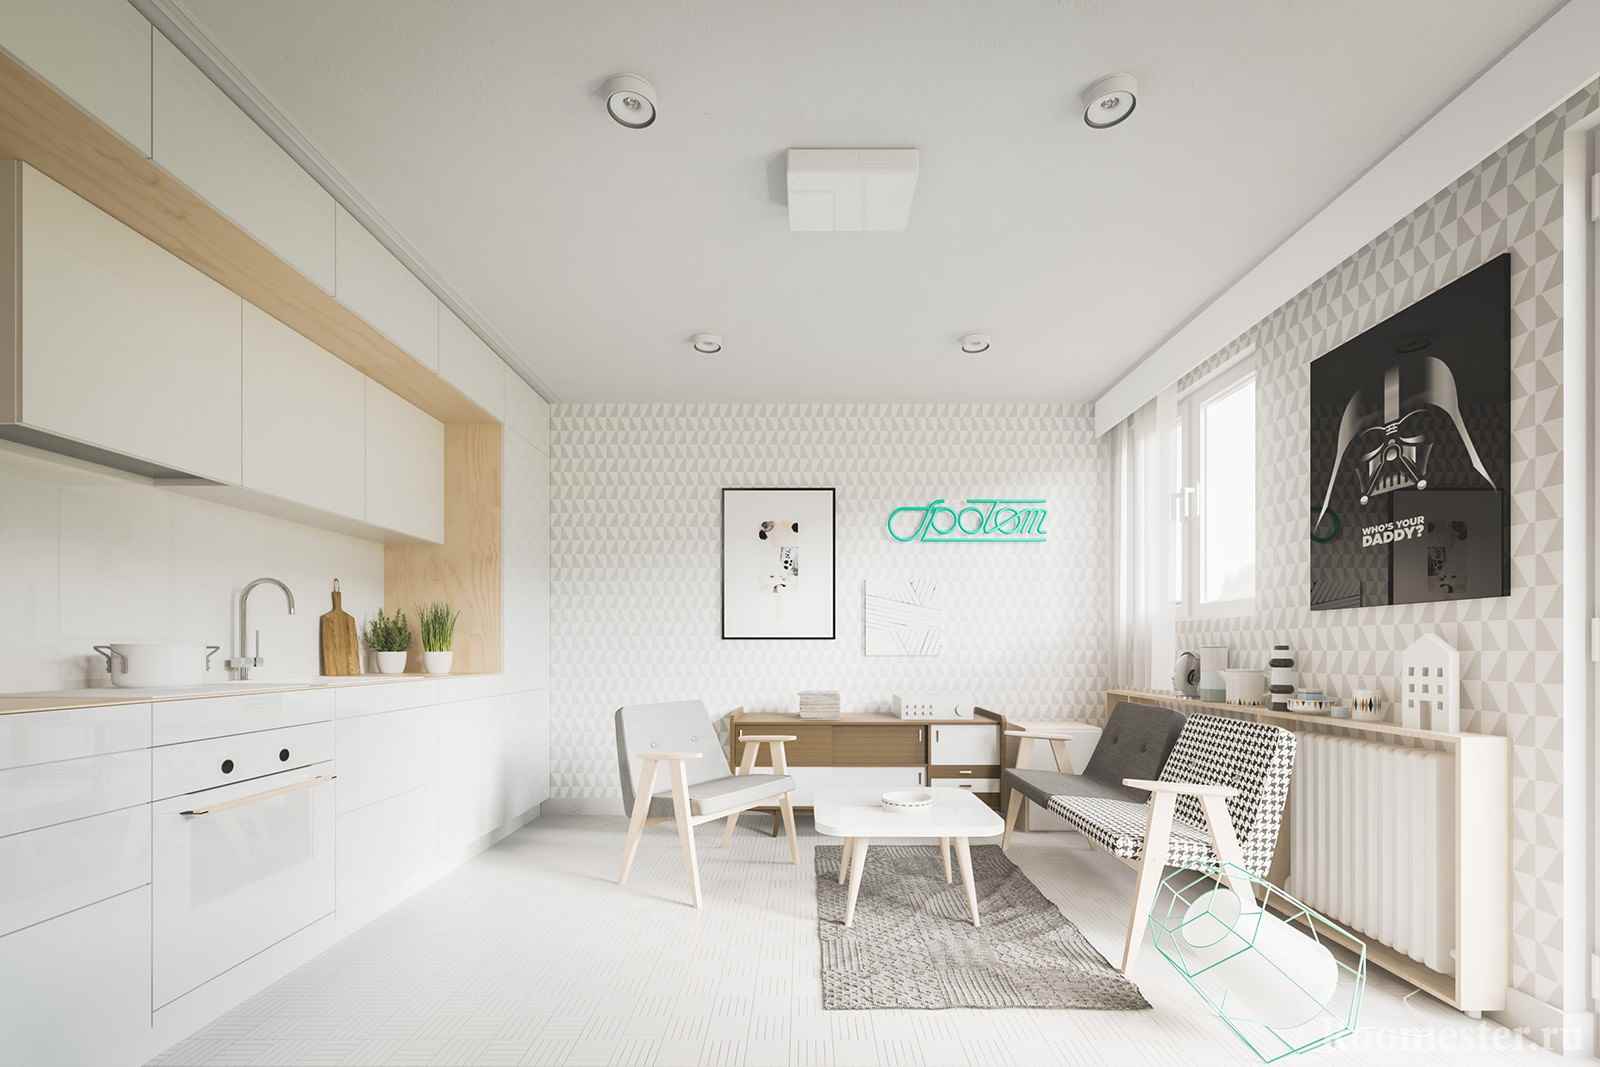 An example of a bright studio design of 20 sq.m.